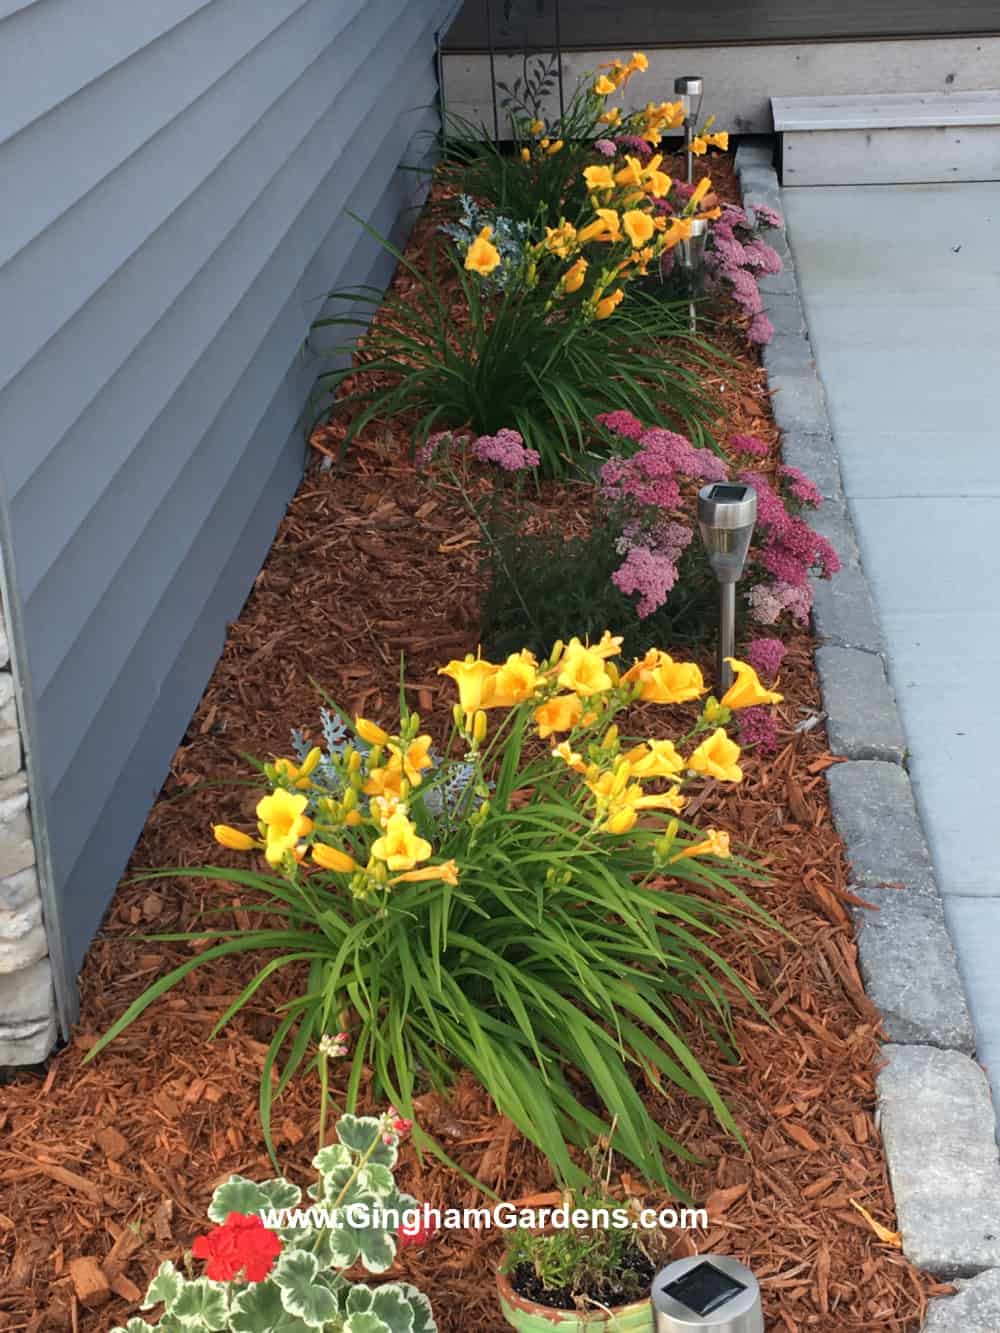 Colorful flower bed along a sidewalk entry to a home.